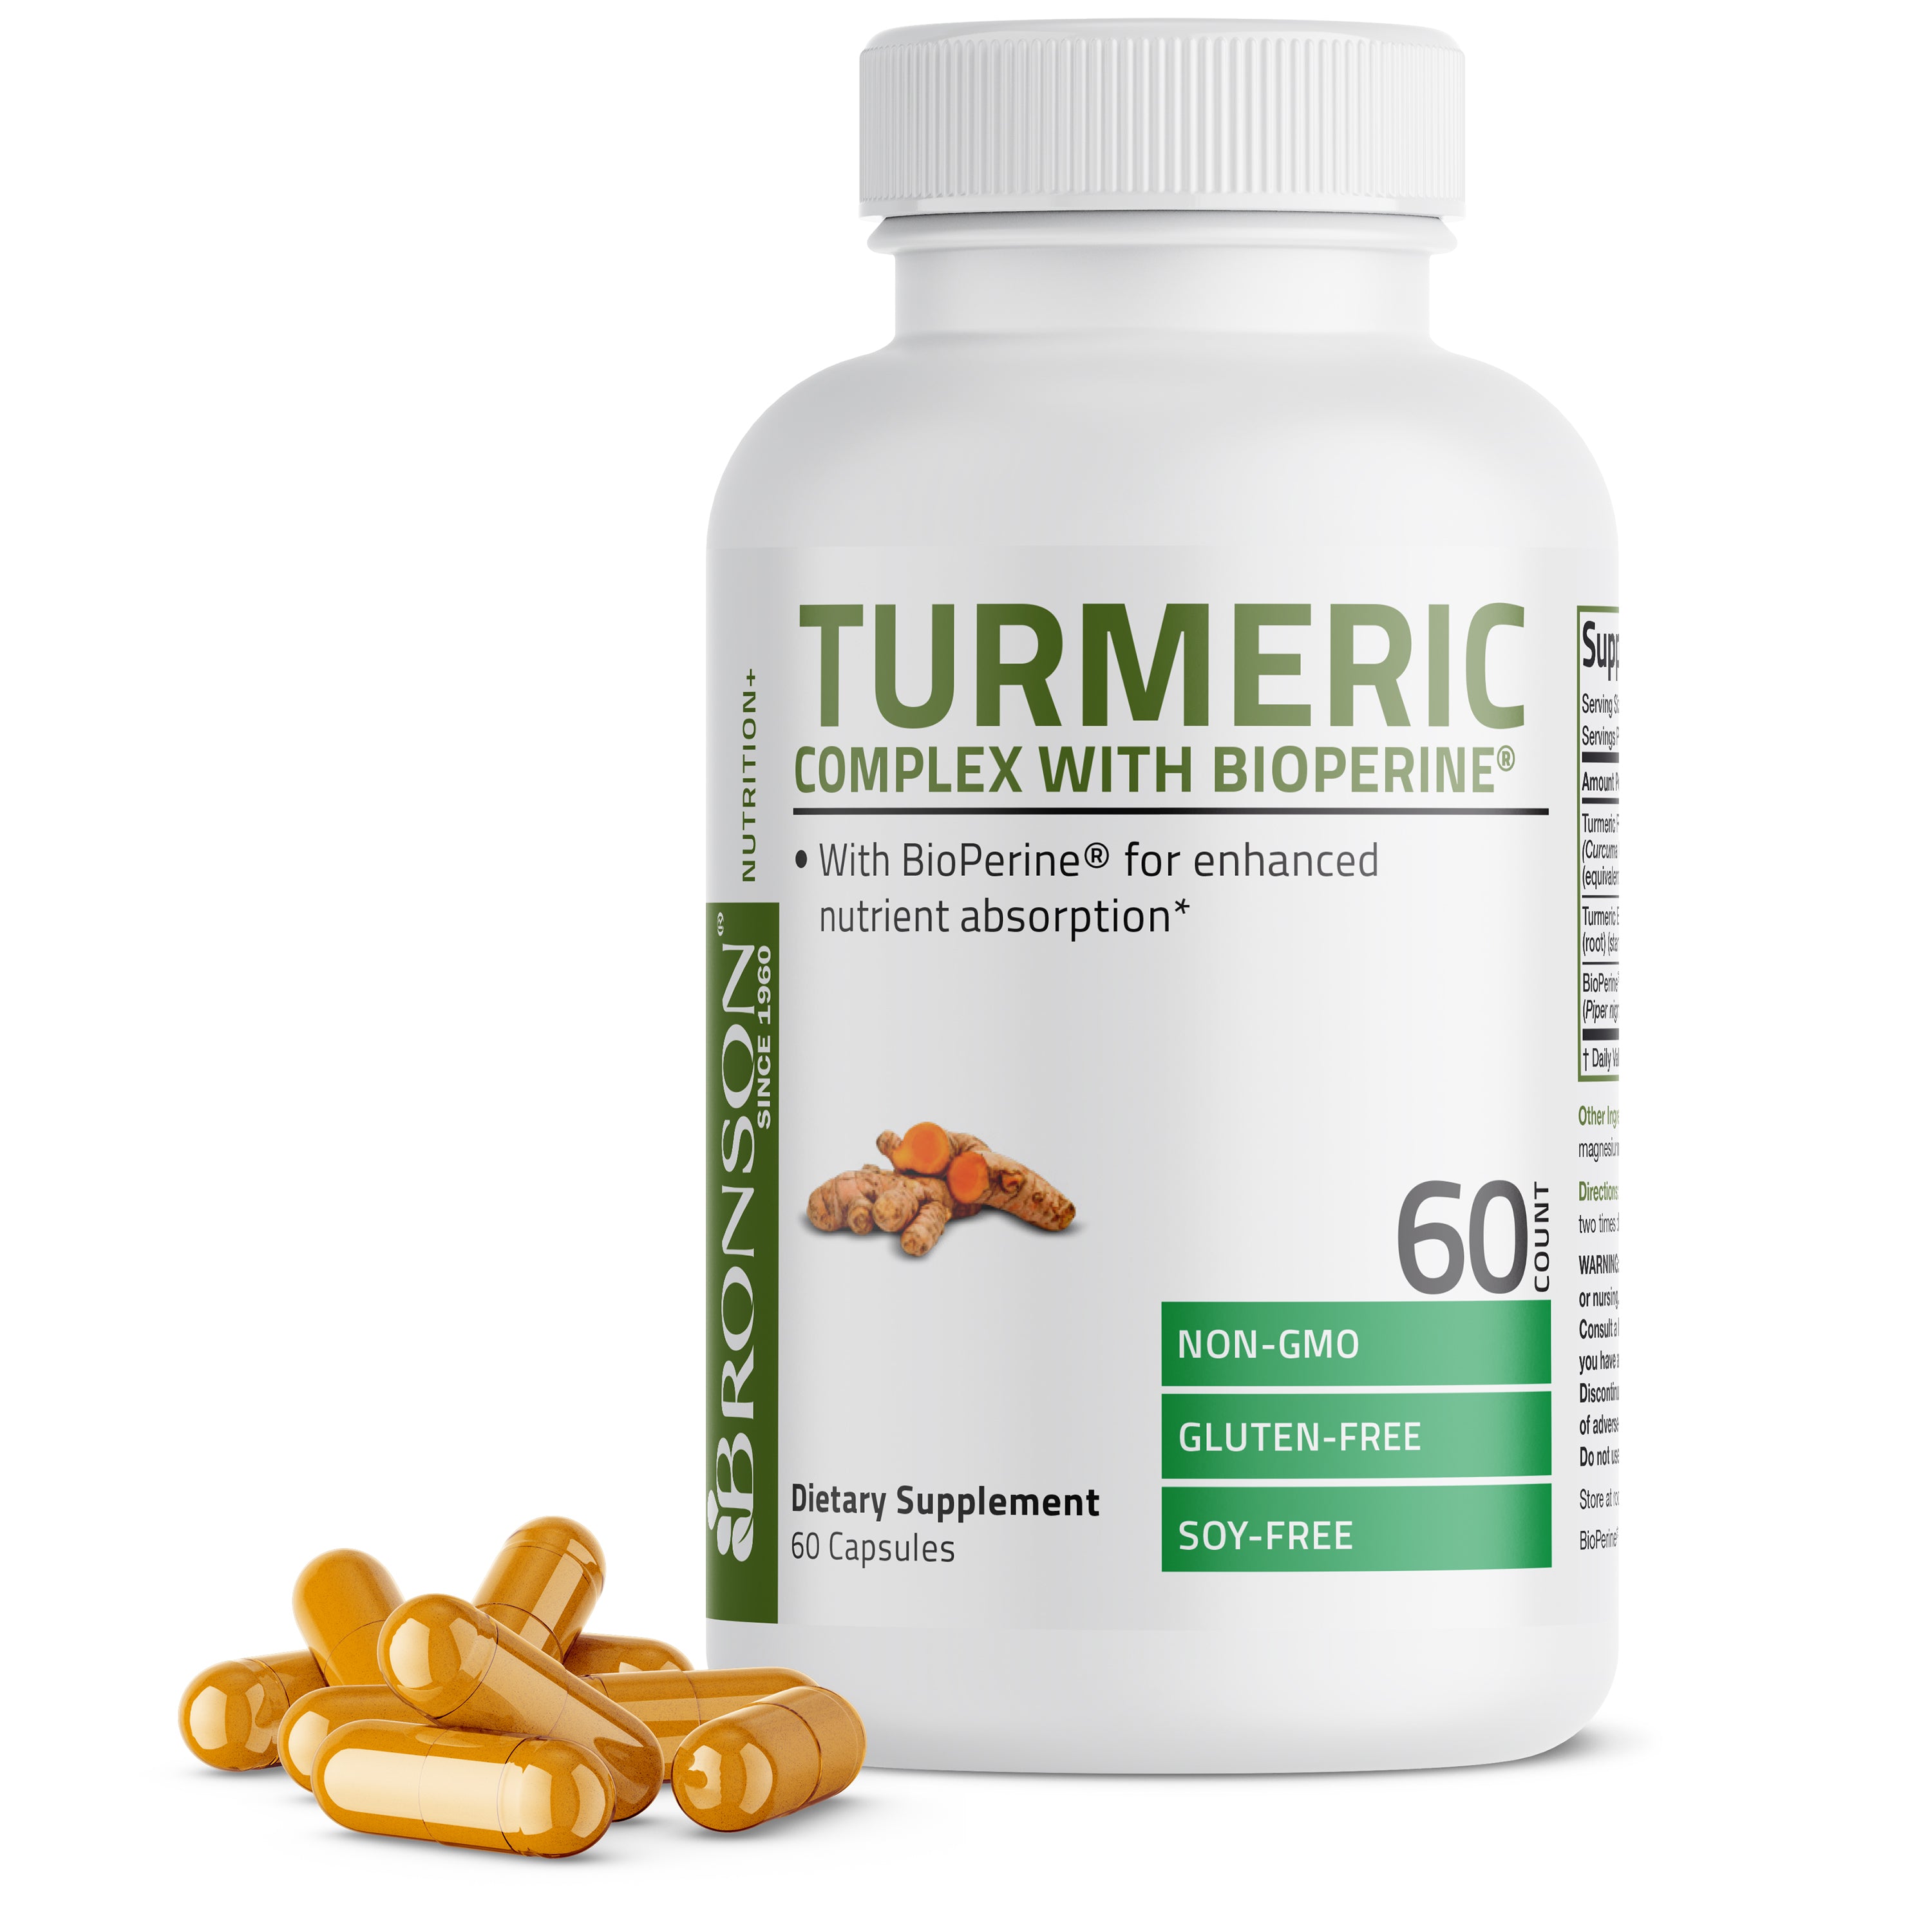 Turmeric Complex with BioPerine® - 1,000 mg view 1 of 6